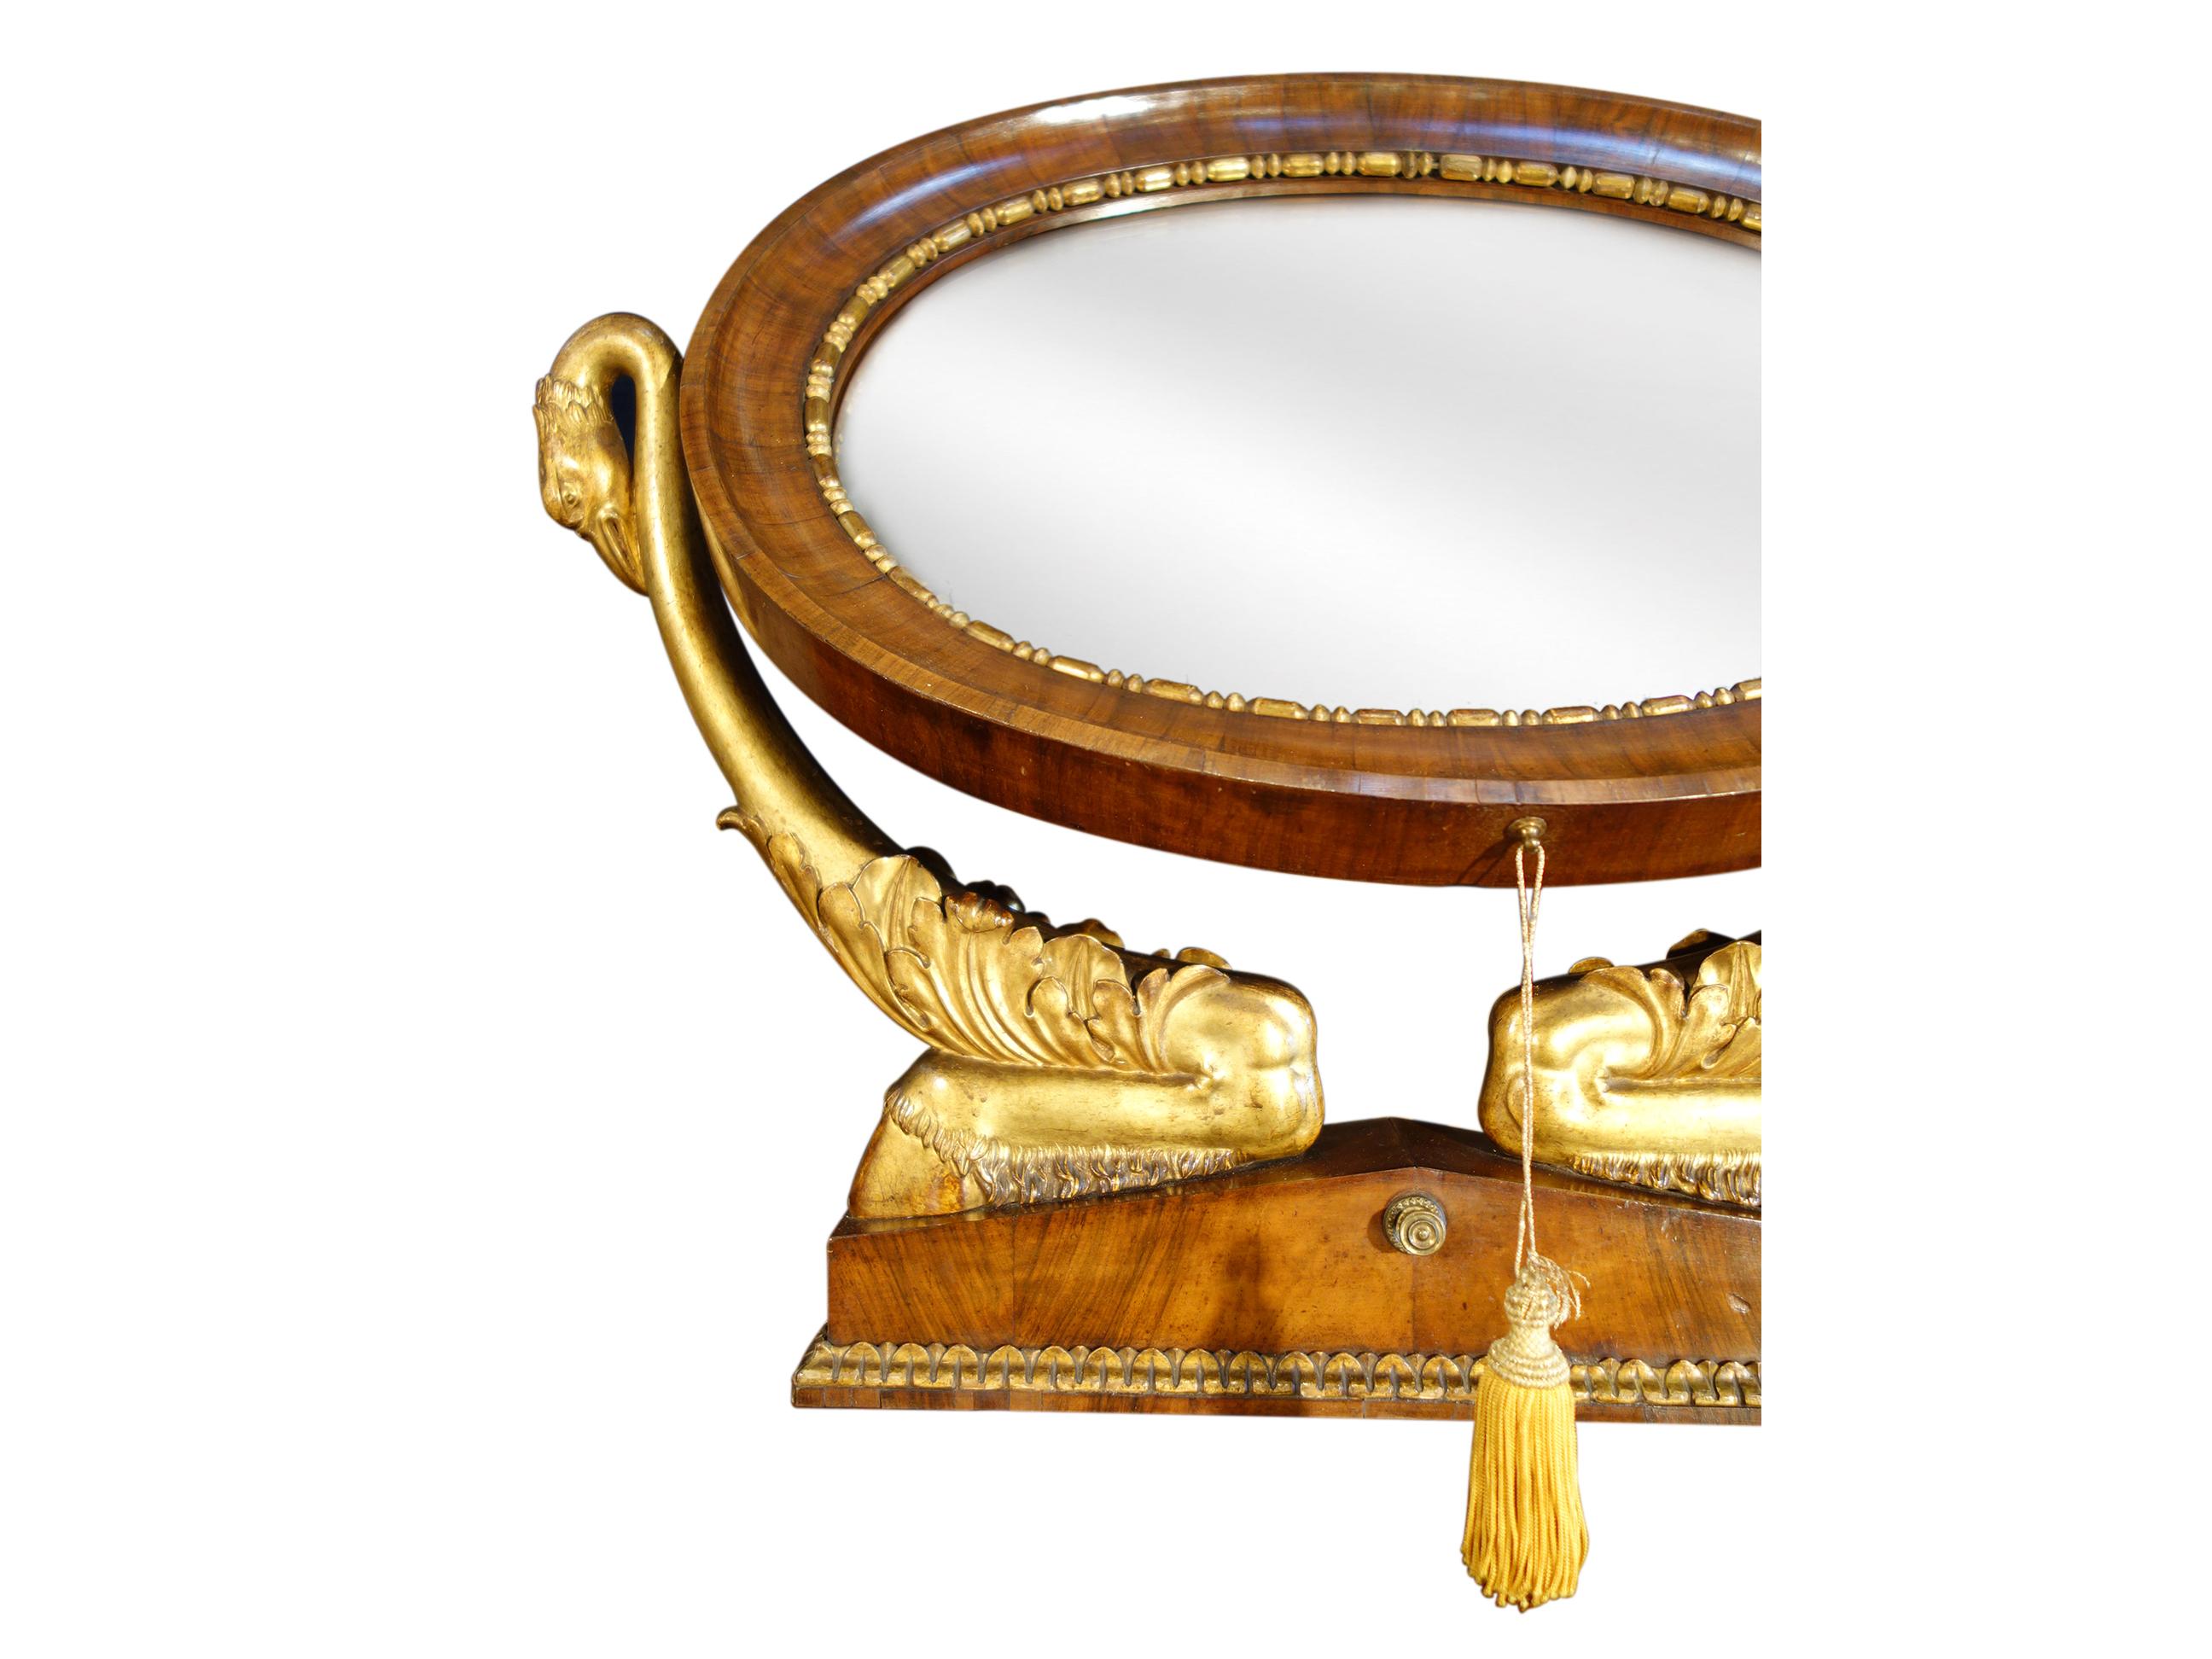 Italian Empire Walnut Psyche Table Mirror with Gold Gilt Swans and Ebony Inlay In Good Condition For Sale In Encinitas, CA